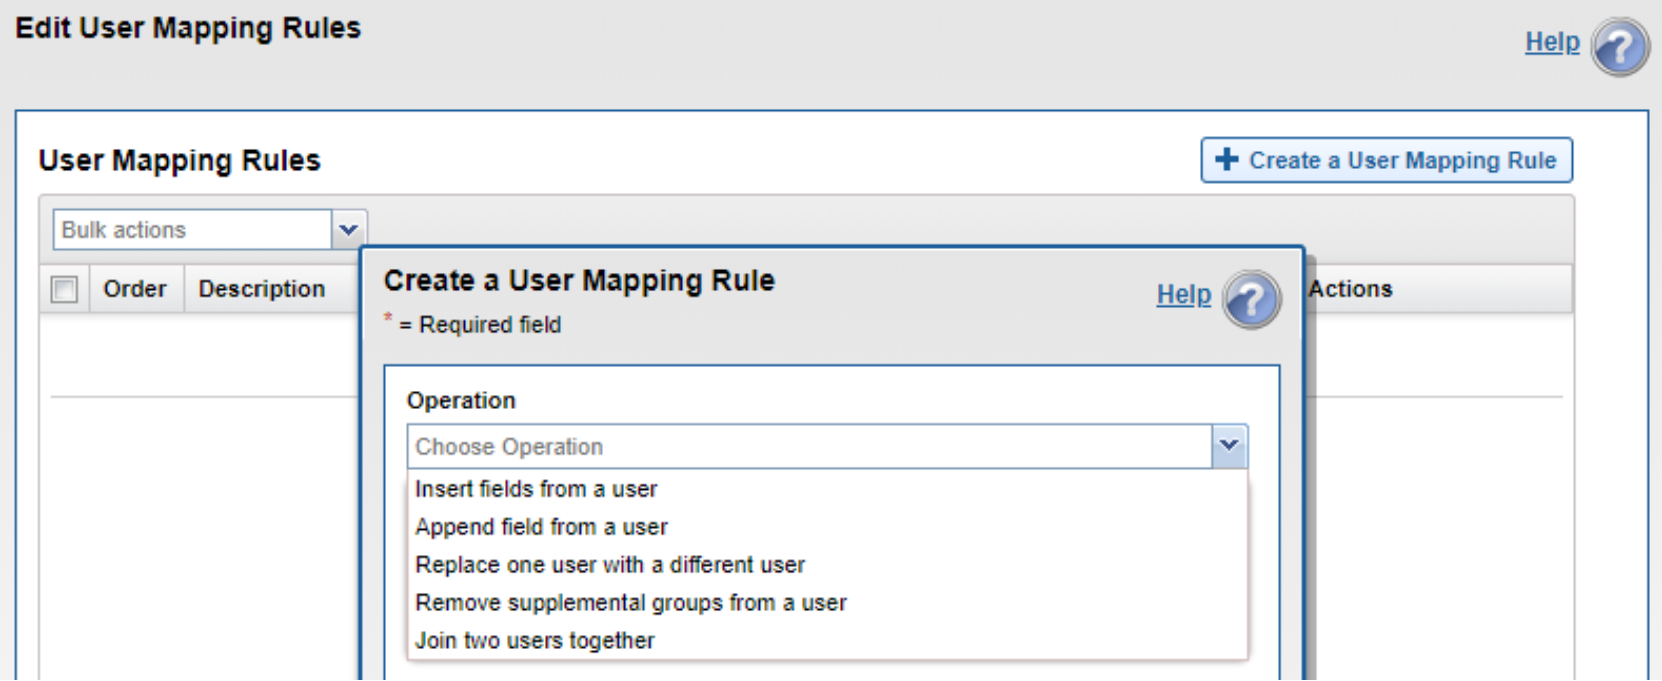  A figure to show how to edit/add user mapping rules with different operations